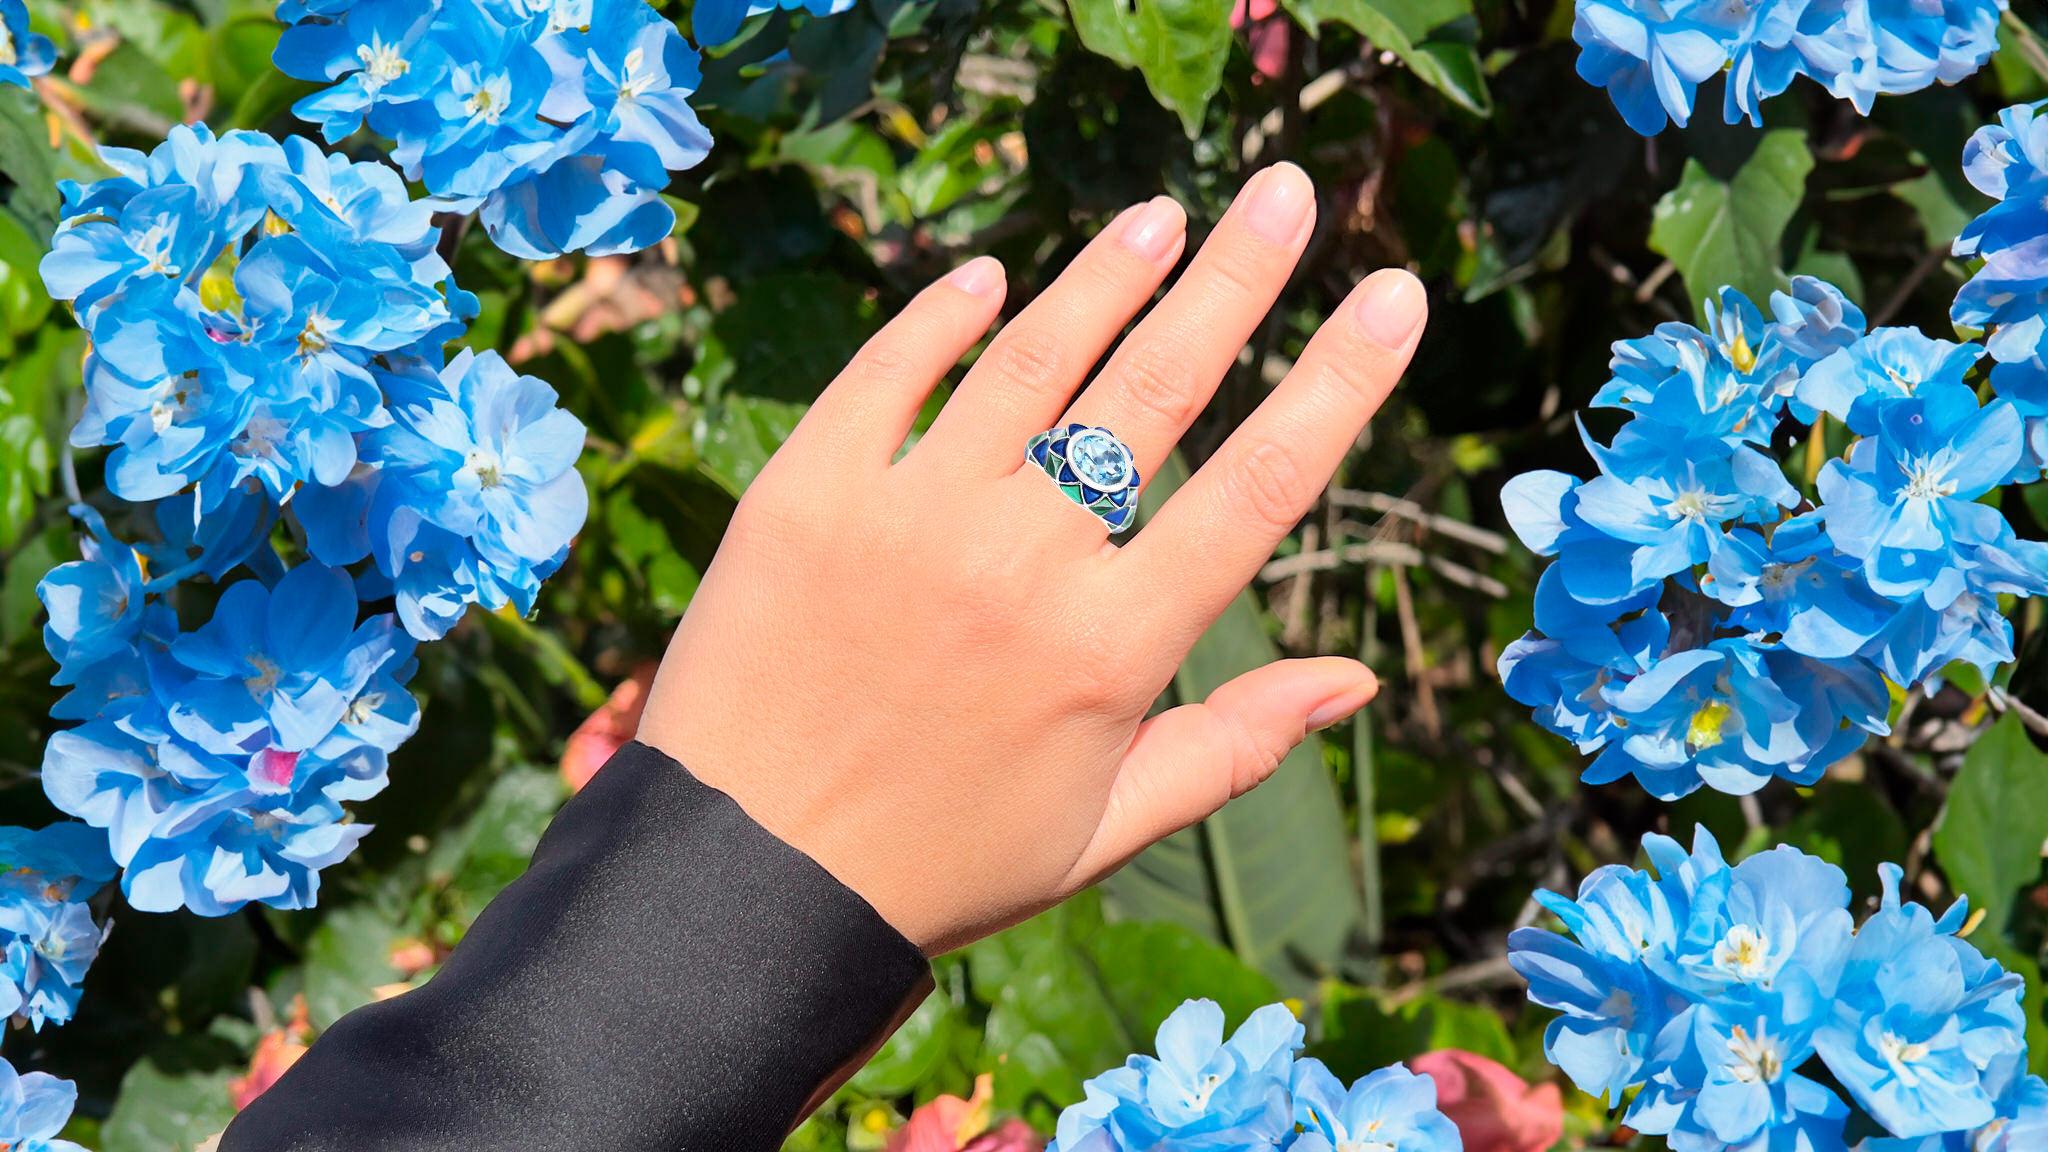 It comes with the Gemological Appraisal by GIA GG/AJP
All Gemstones are Natural in Origin
Swiss Blue Topaz = 3.25Carats
Metal: Enamel, Rhodium Plated Sterling Silver
Ring Size: 6* US
*It can be resized complimentary